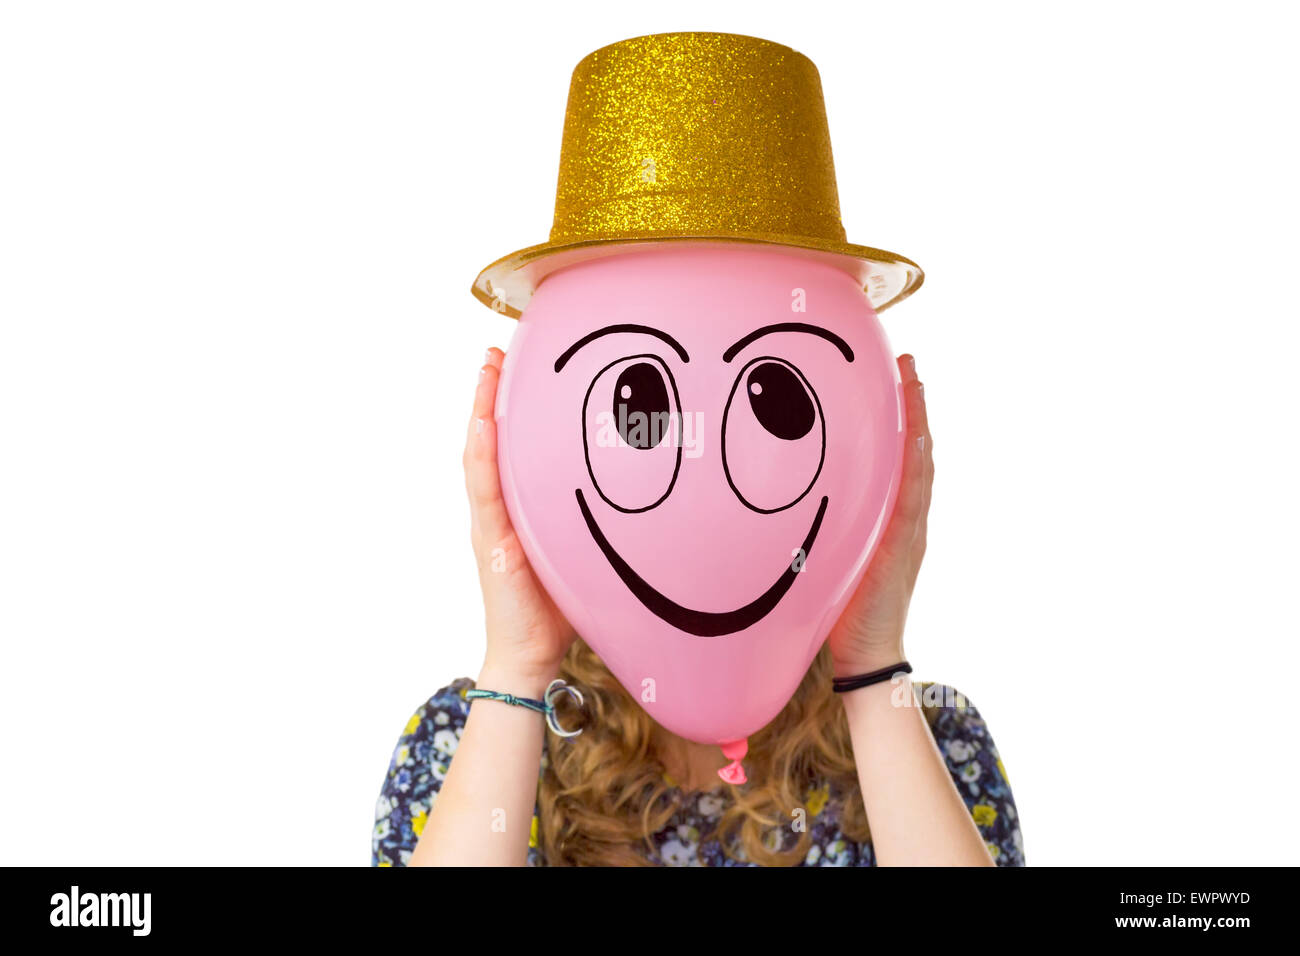 Girl holding balloon with expression of smiling face and gold hat isolated on white background Stock Photo